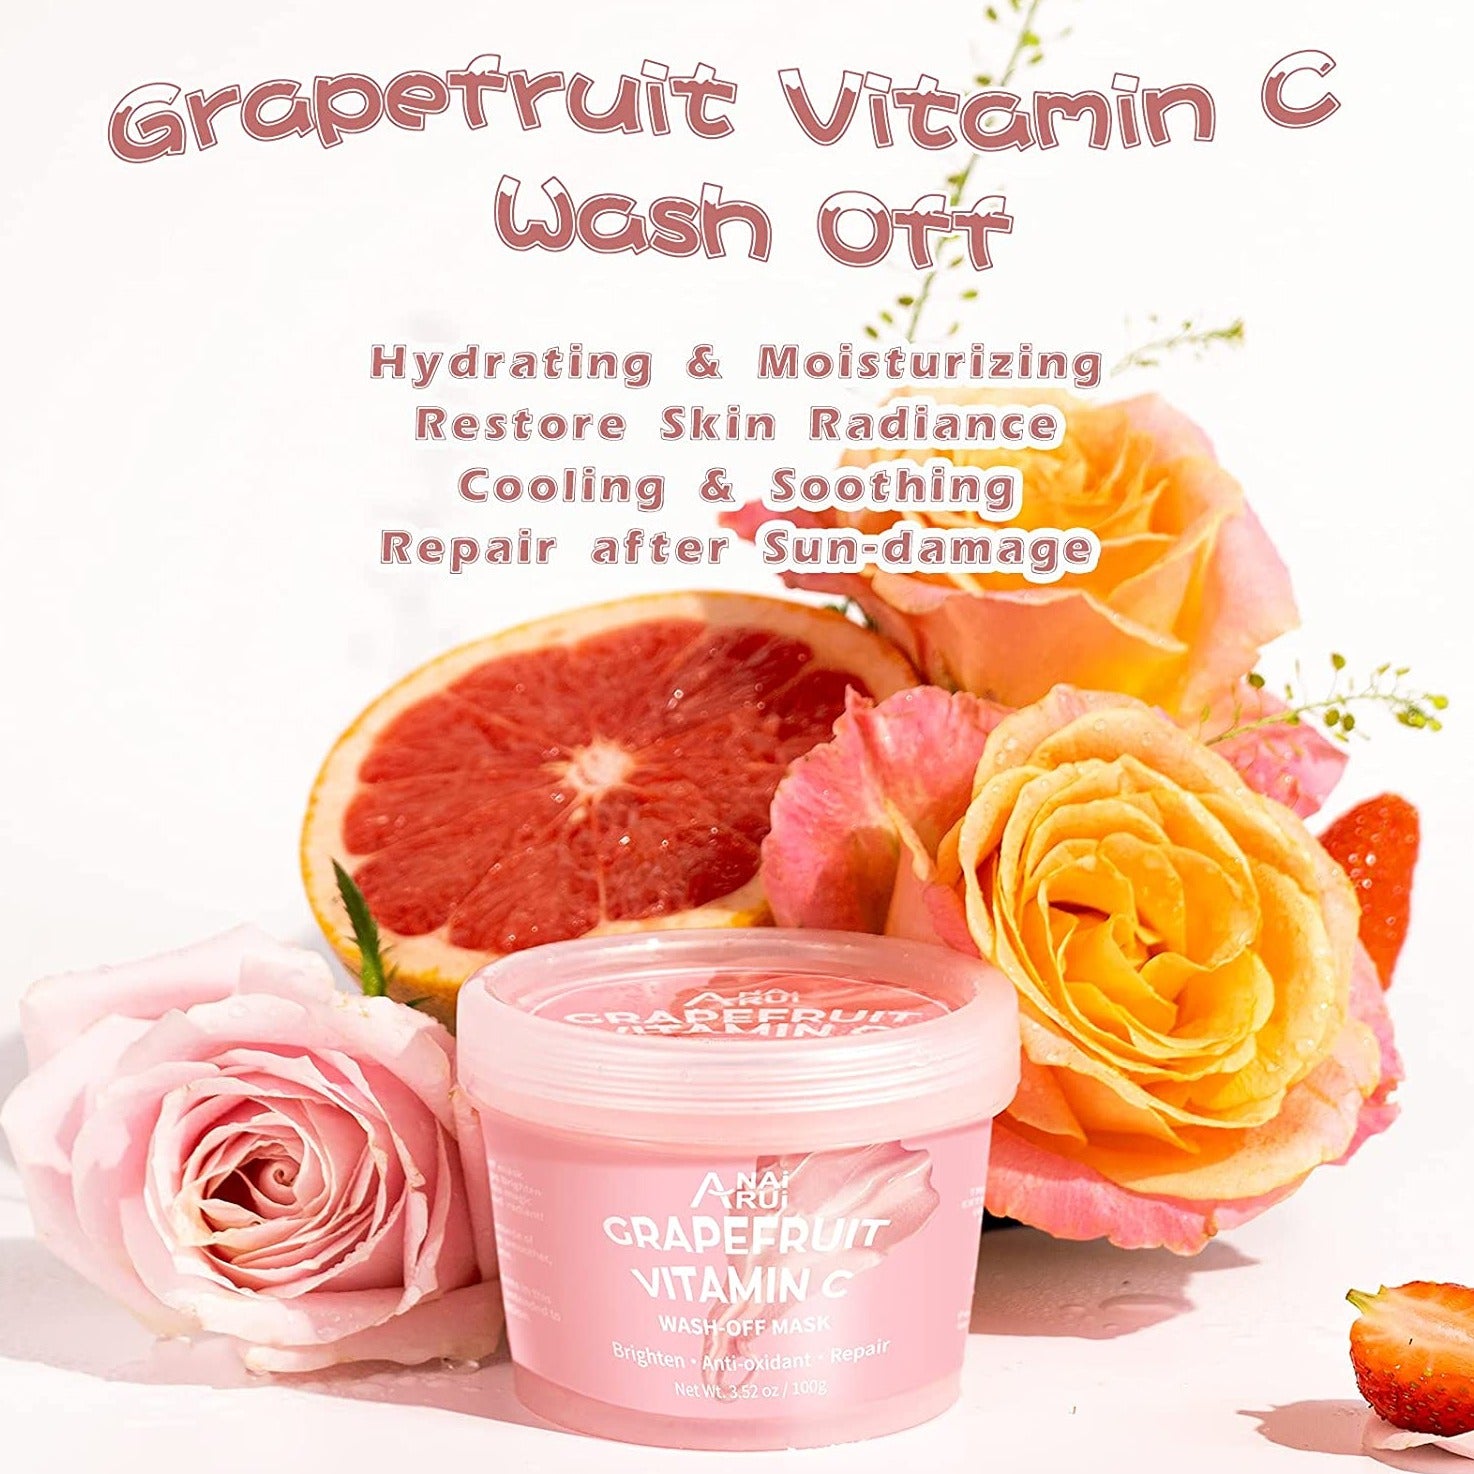 Grapefruit Vitamin C Wash-off Facial Mask incorporates Hydrating, Soothing, Nourishing and Repairing properties to restore and maintain a youthful healthy glow. Help restore your skin's radiance after sun exposure, daily stressors, adult acne & environmental pollution while Preventing free-radical damage by using this mask 3 times a week. Don't run to untrustworthy skin care with false promises